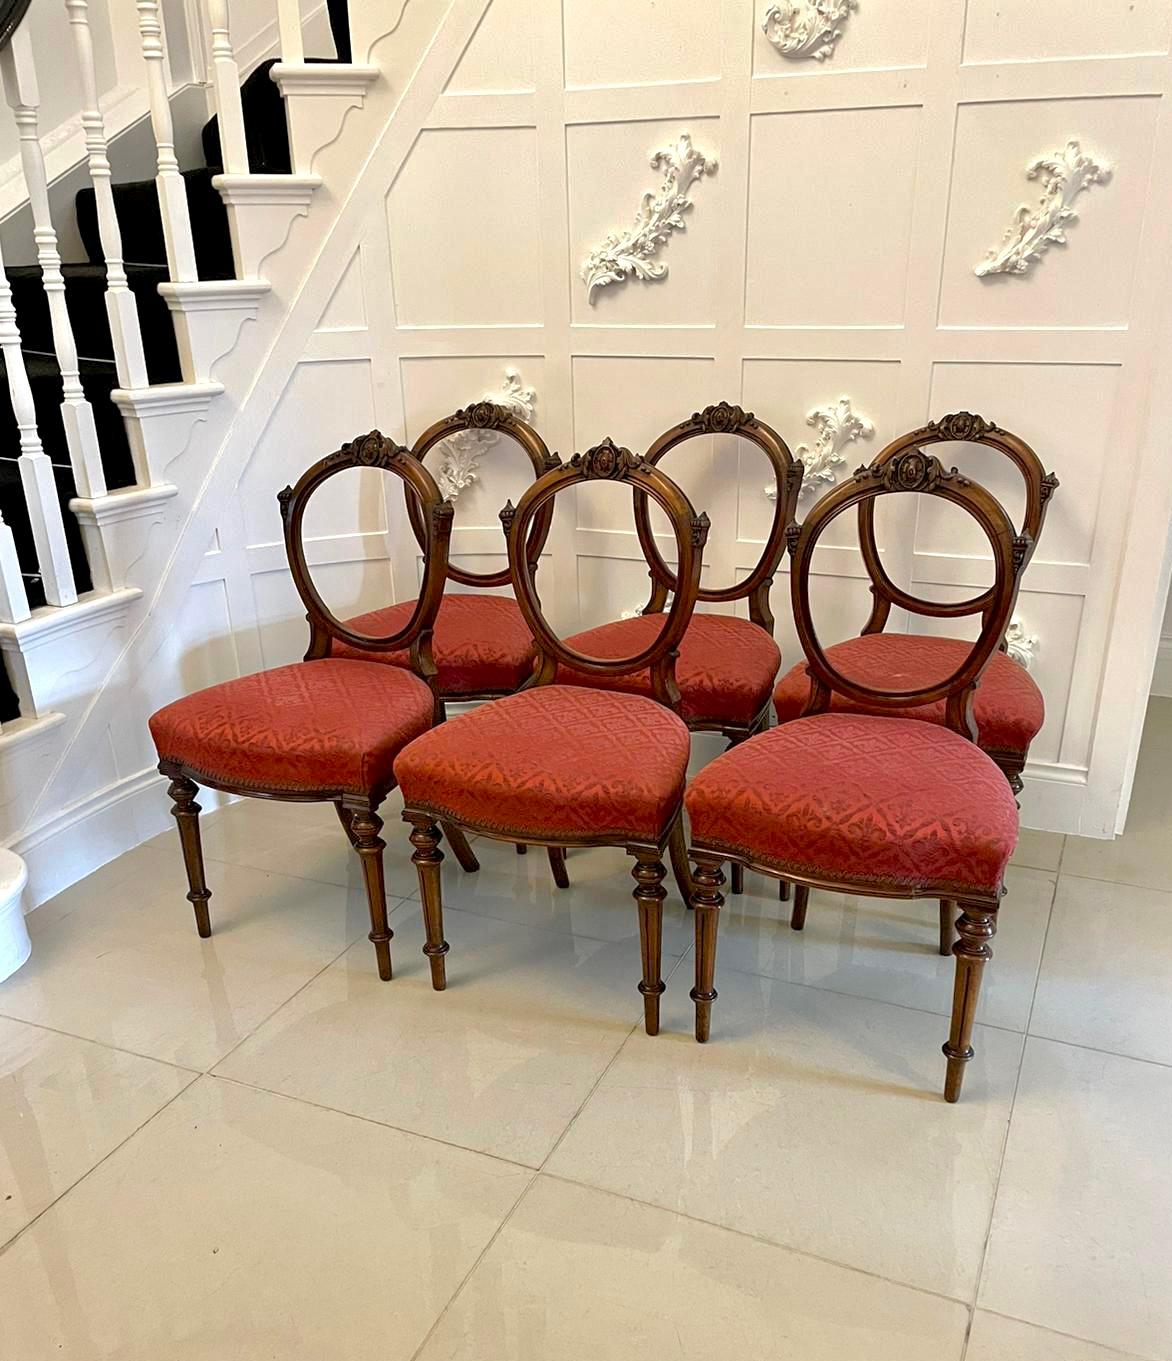 Fine quality set of 6 antique Victorian walnut dining chairs with an elegant carved walnut shaped balloon back, upholstered seats in a classic red quality fabric with serpentine fronts. They stand on elegant turned and reeded legs to the front and